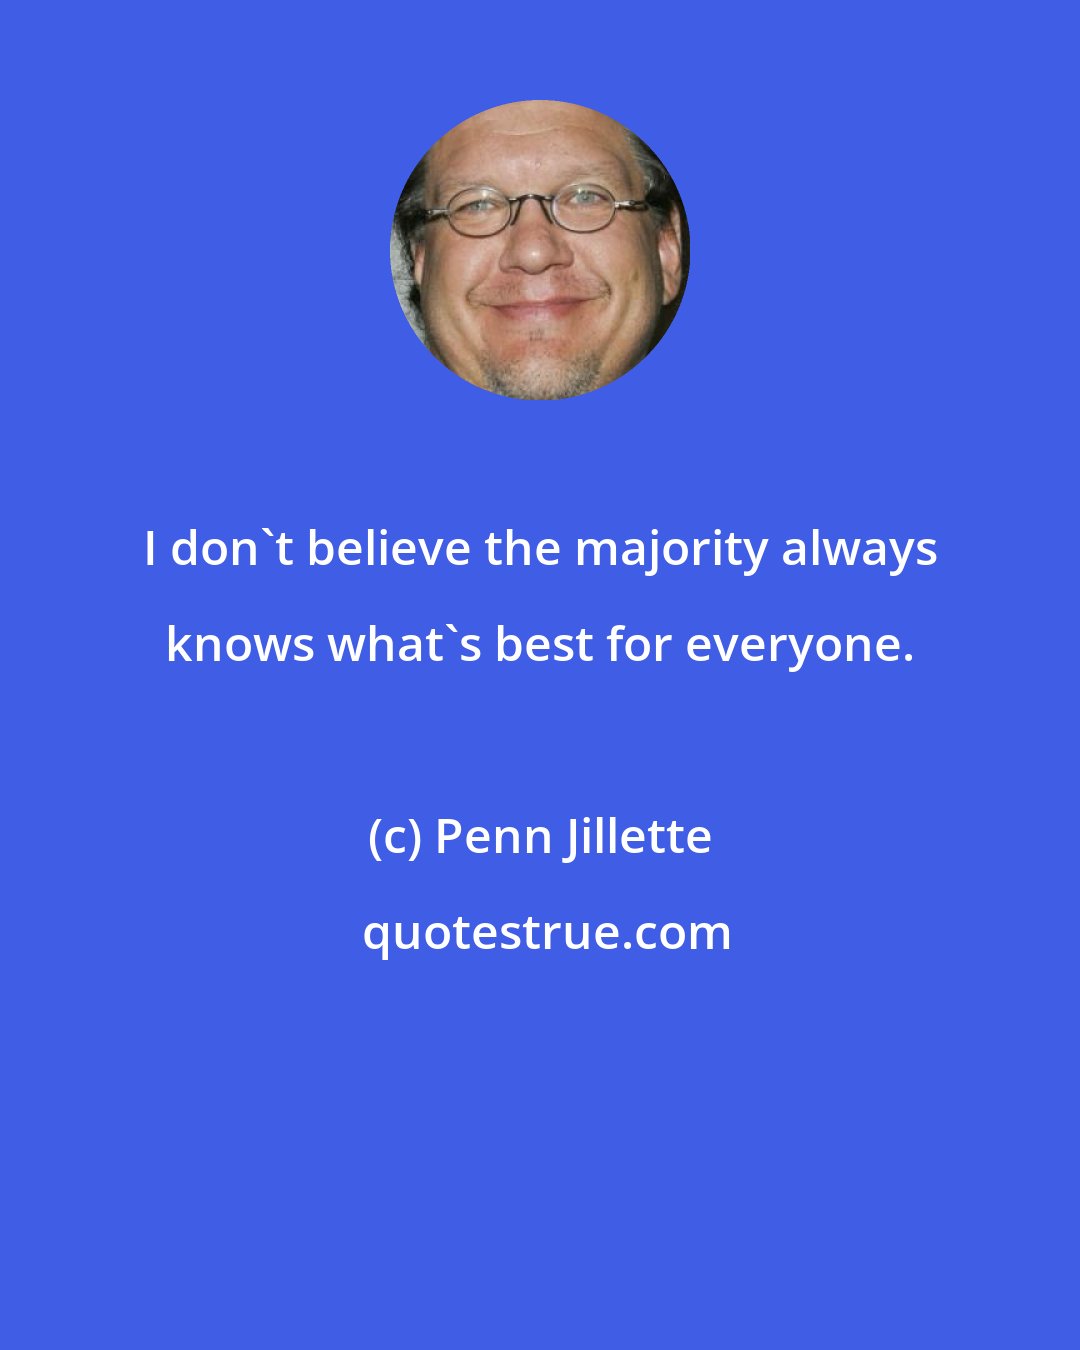 Penn Jillette: I don't believe the majority always knows what's best for everyone.